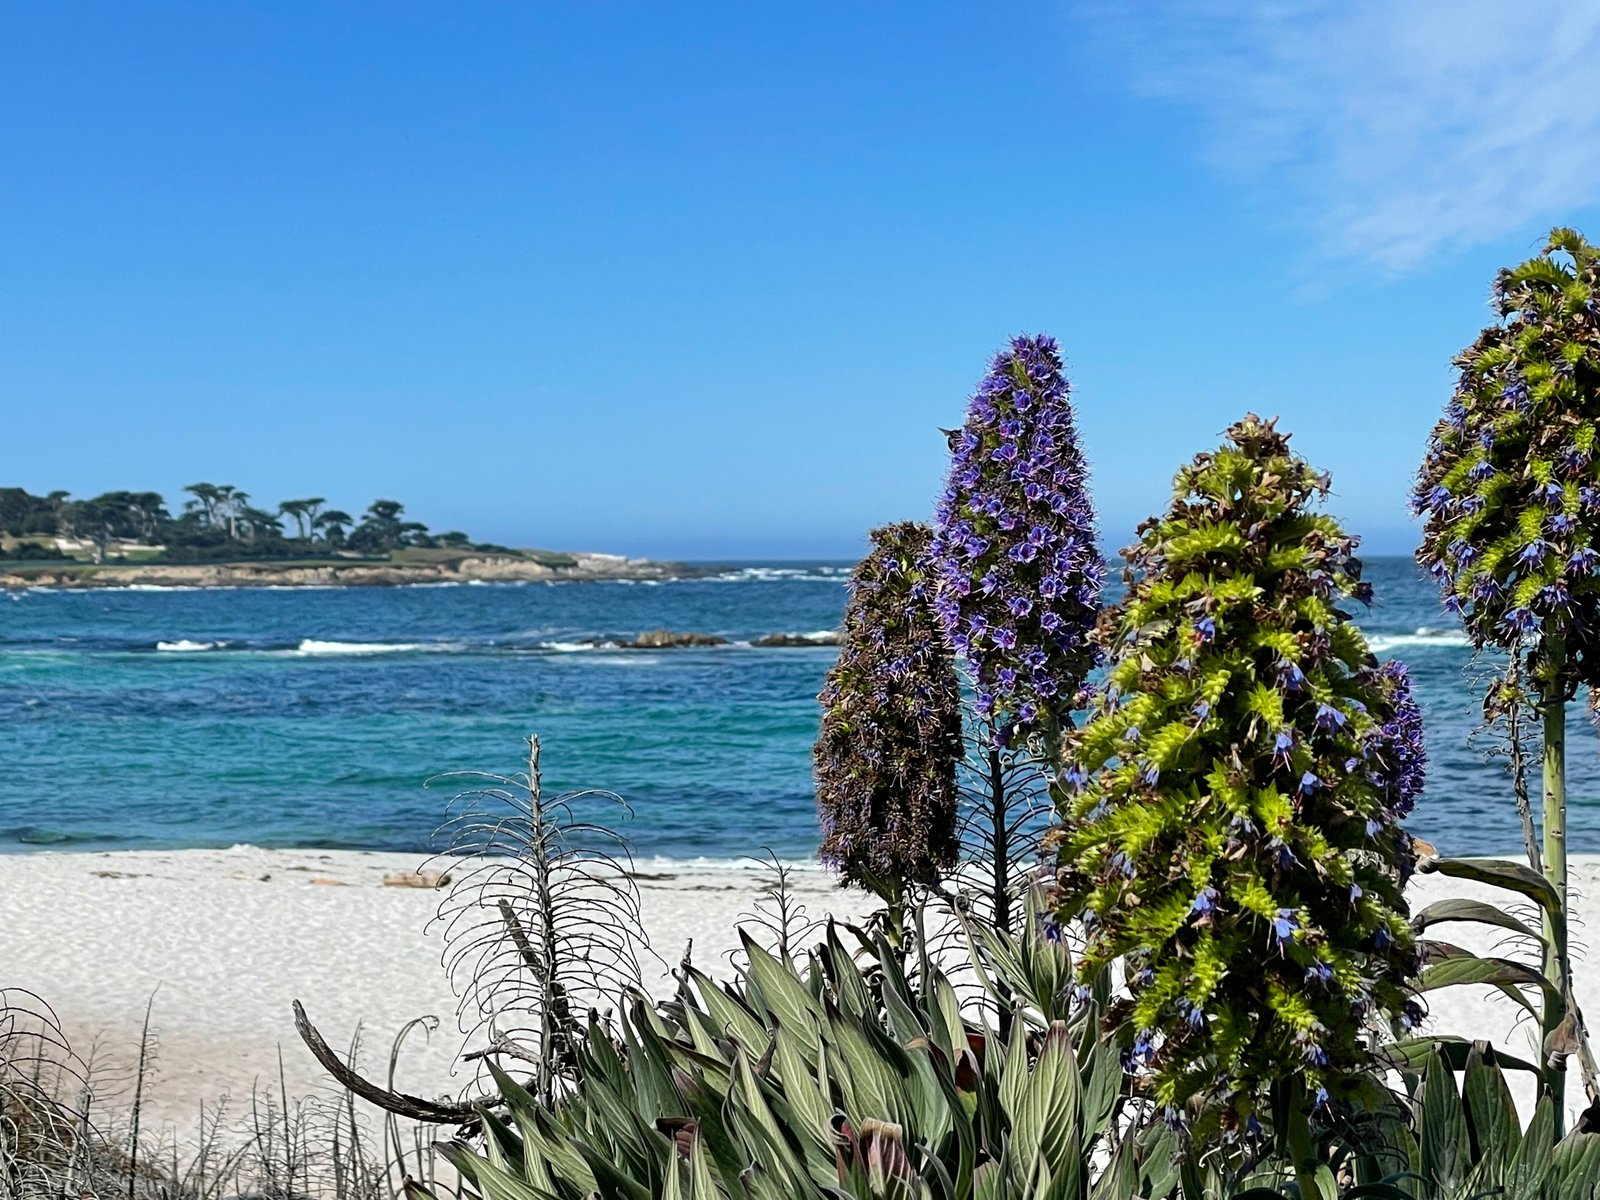 17-Mile Drive is a visual stunner